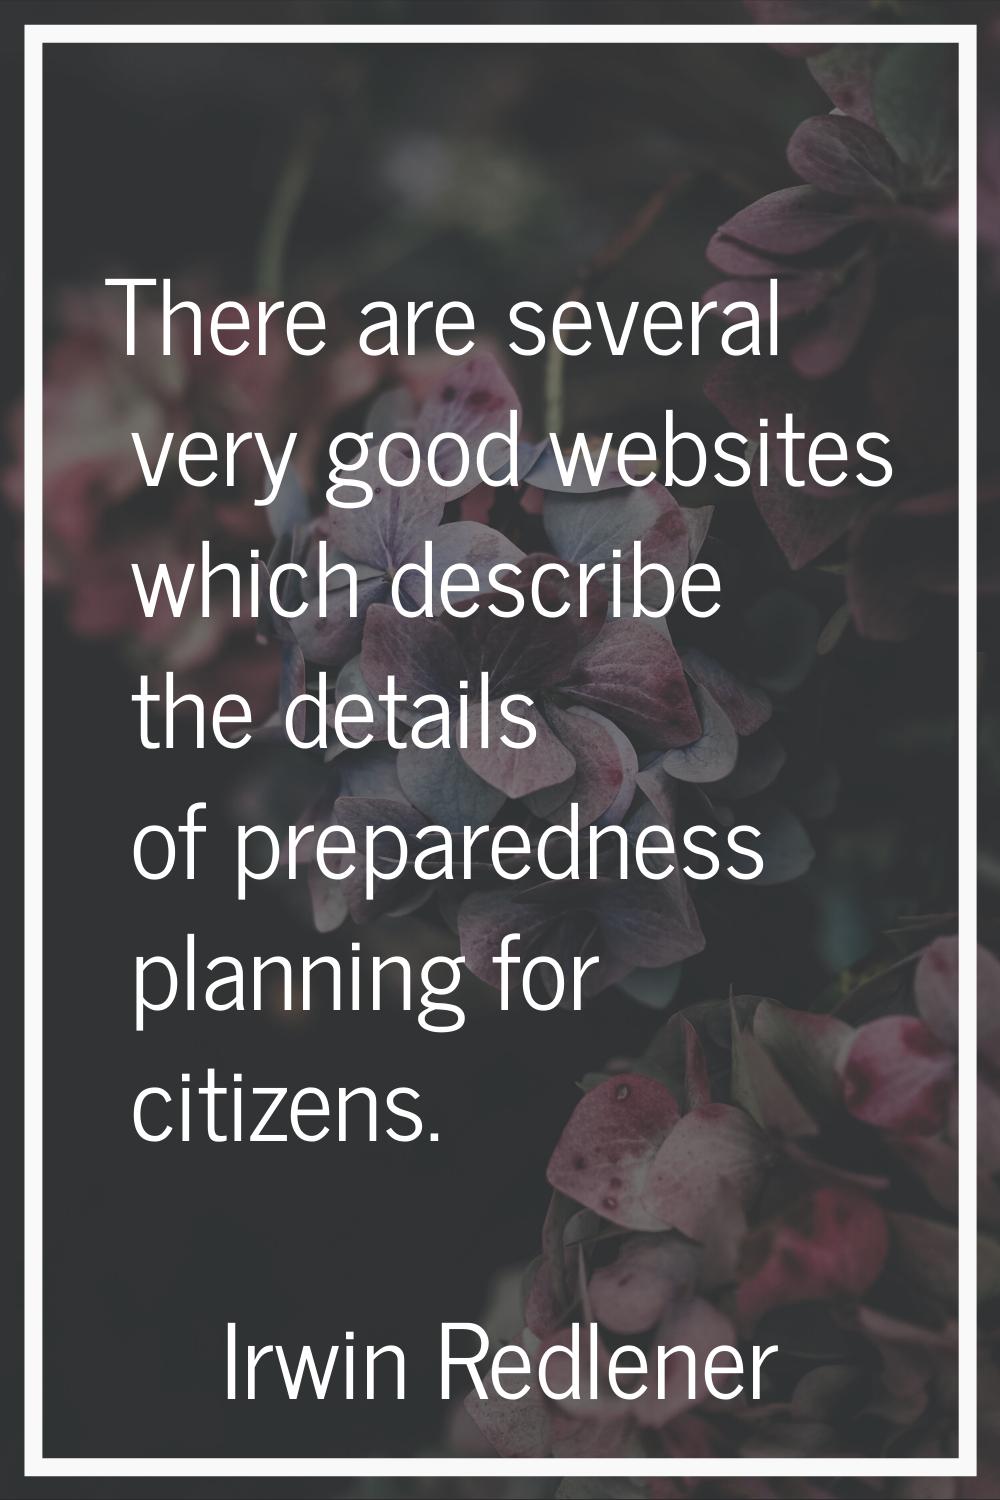 There are several very good websites which describe the details of preparedness planning for citize